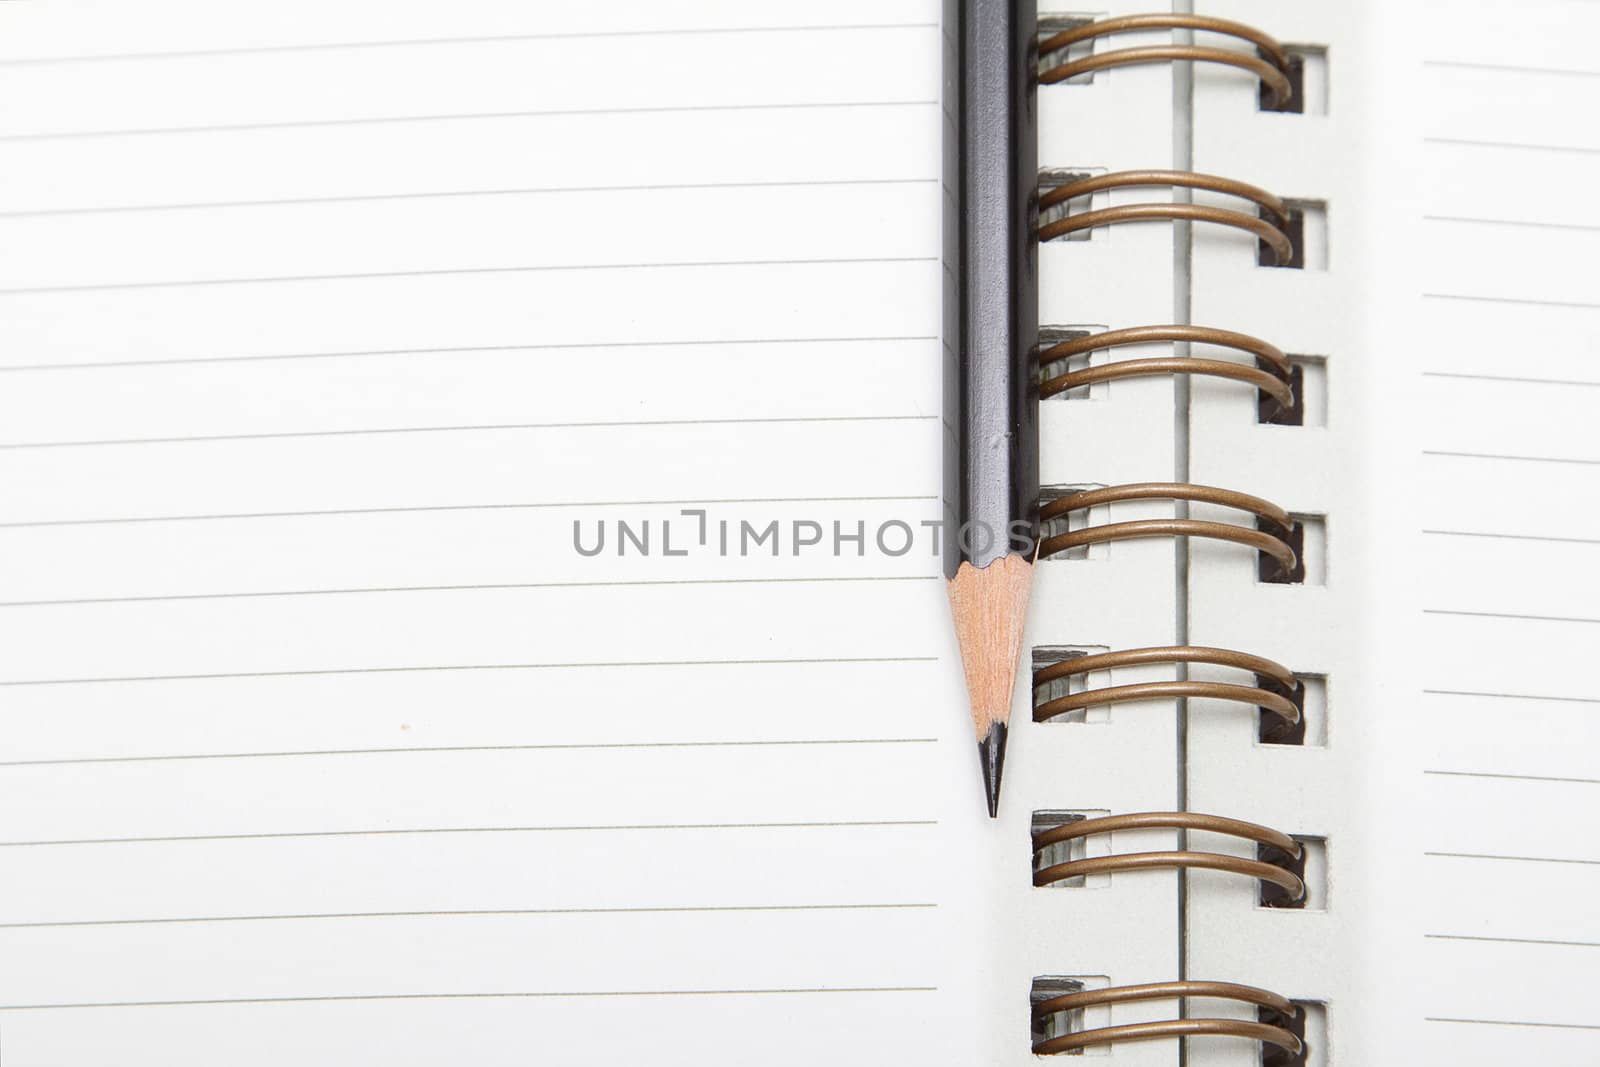 Lined spiral diary with a black pencil